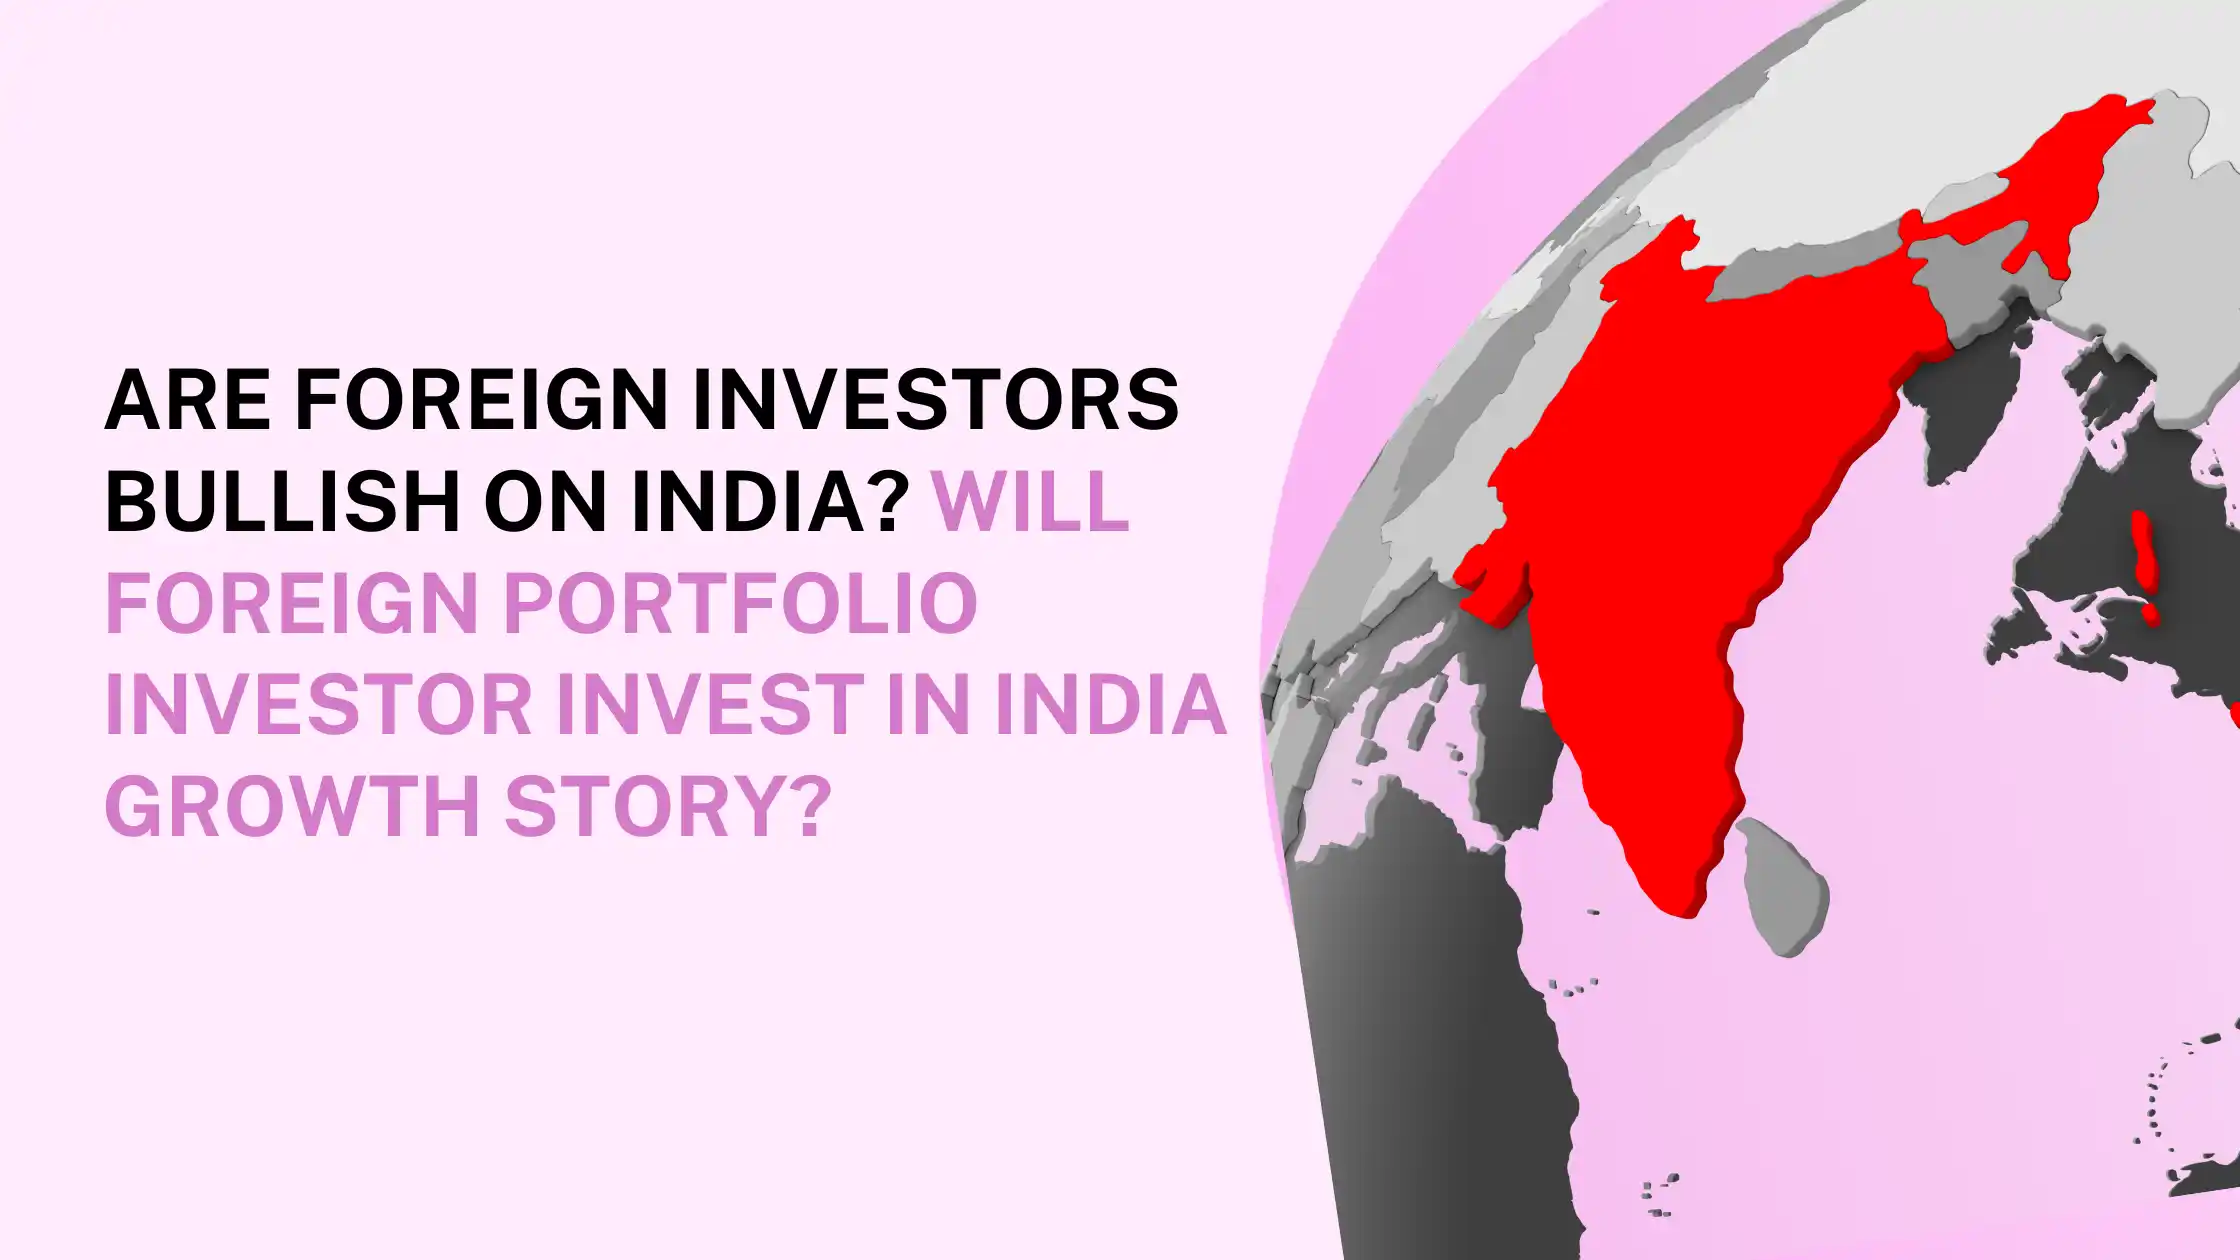 Are Foreign Investors Bullish On India? Will Foreign Portfolio Investor Invest In India Growth Story